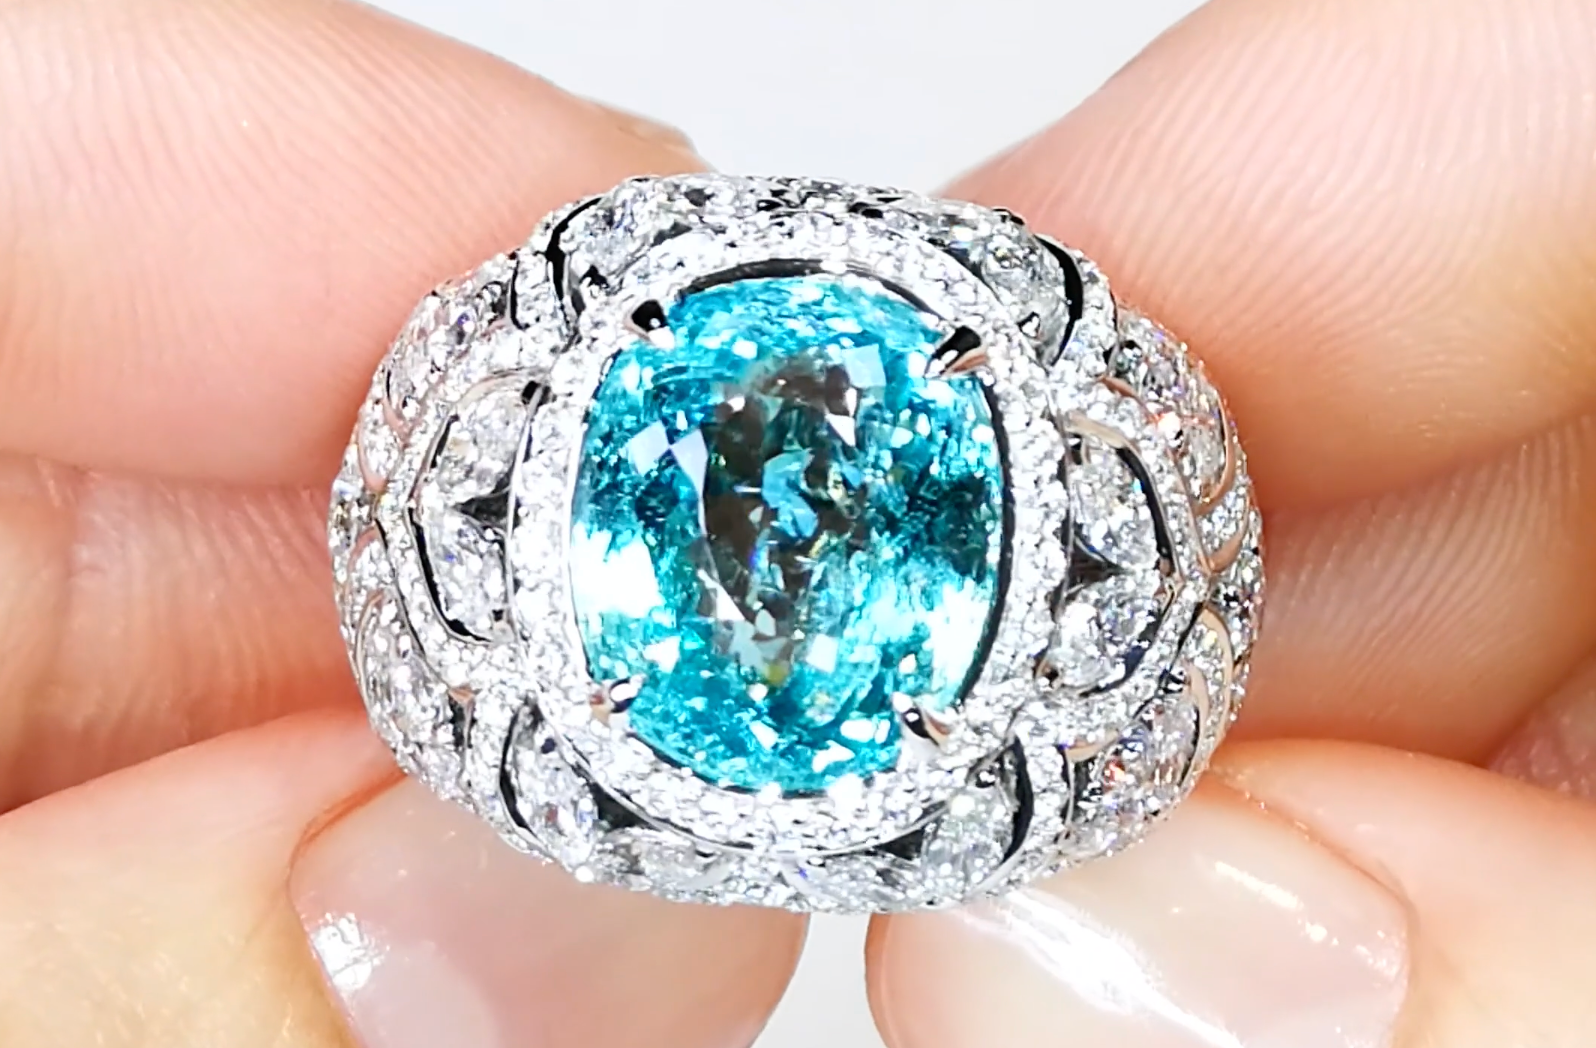 6.14ct Unheated Neon Paraiba Tourmaline Ring with D Flawless Diamonds set in 18K White Gold